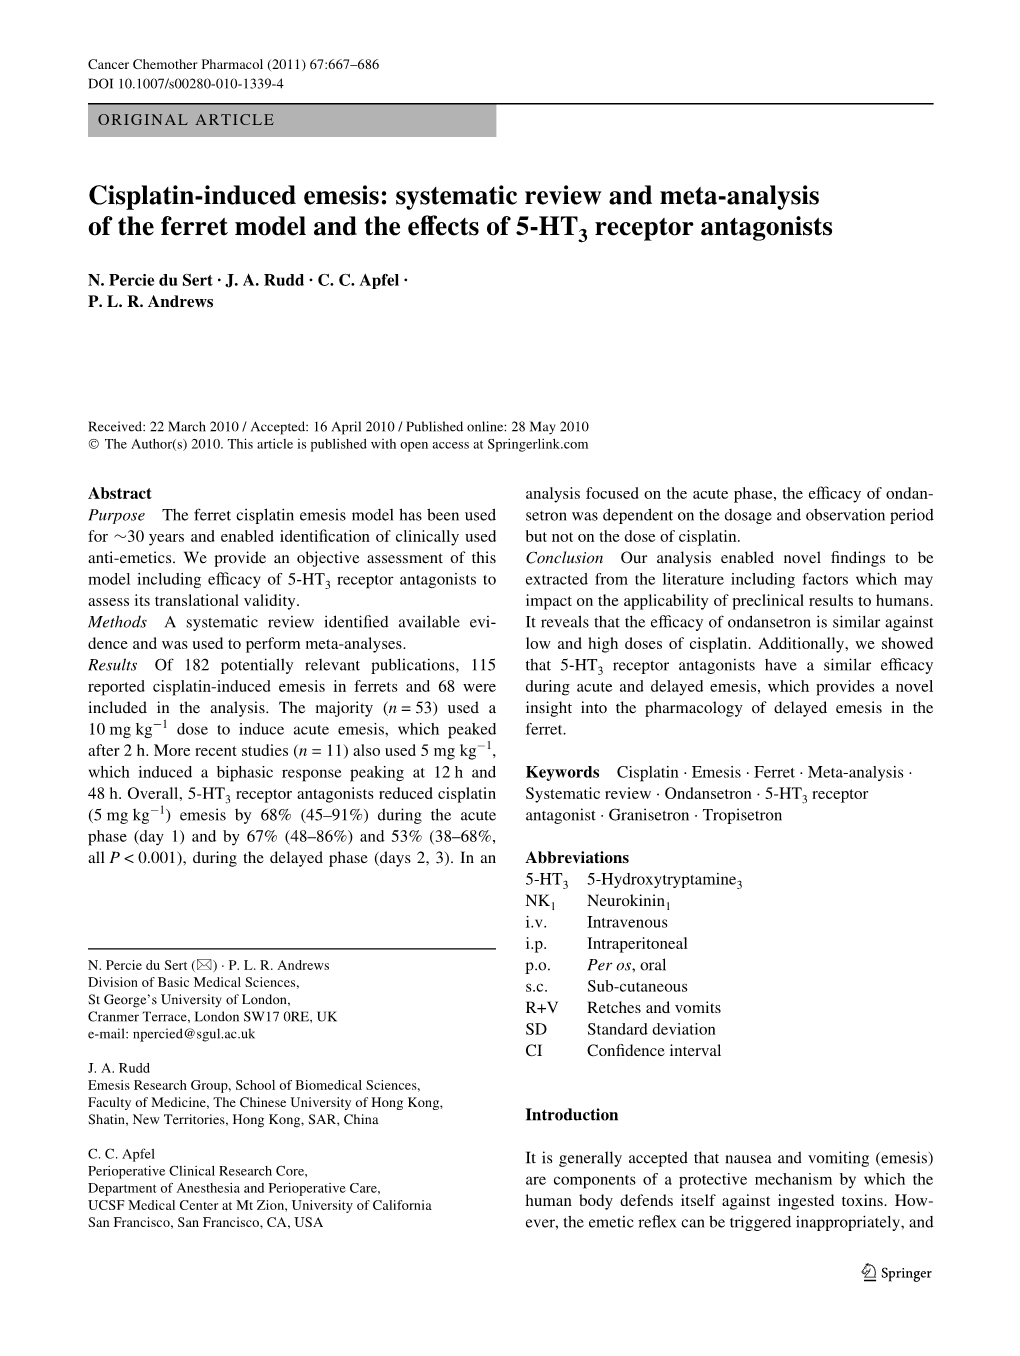 Cisplatin-Induced Emesis: Systematic Review and Meta-Analysis V of the Ferret Model and the E Ects of 5-HT3 Receptor Antagonists